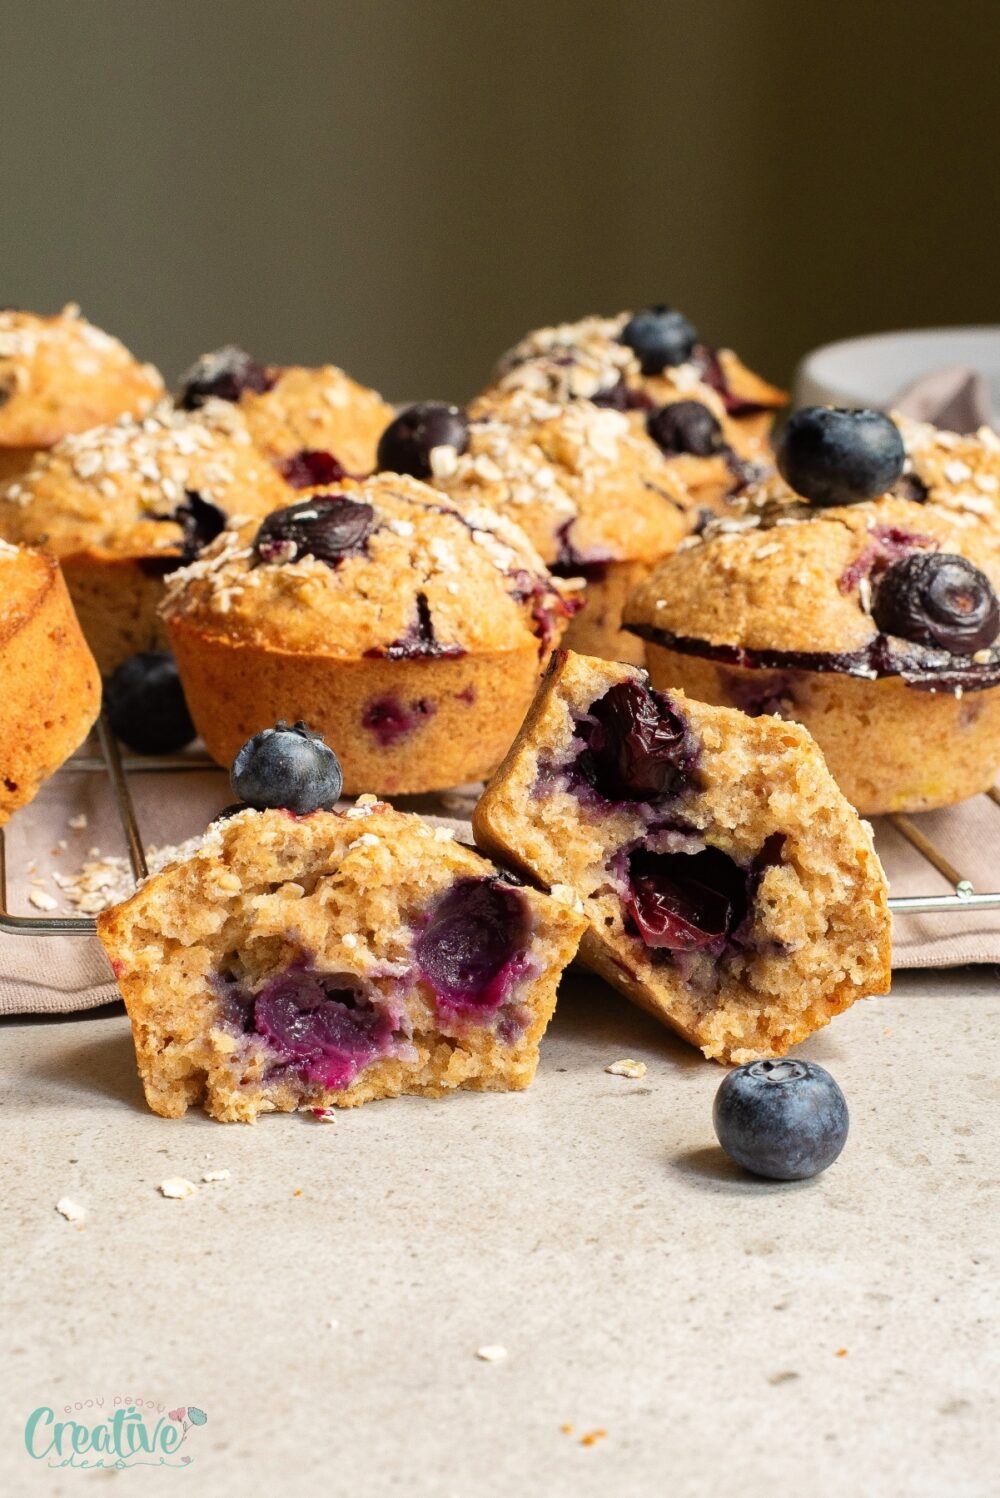 These whole wheat banana blueberry muffins are moist, flavorful, and packed with fiber and nutrients. Enjoy them for breakfast, a snack, or dessert - and make them your own!